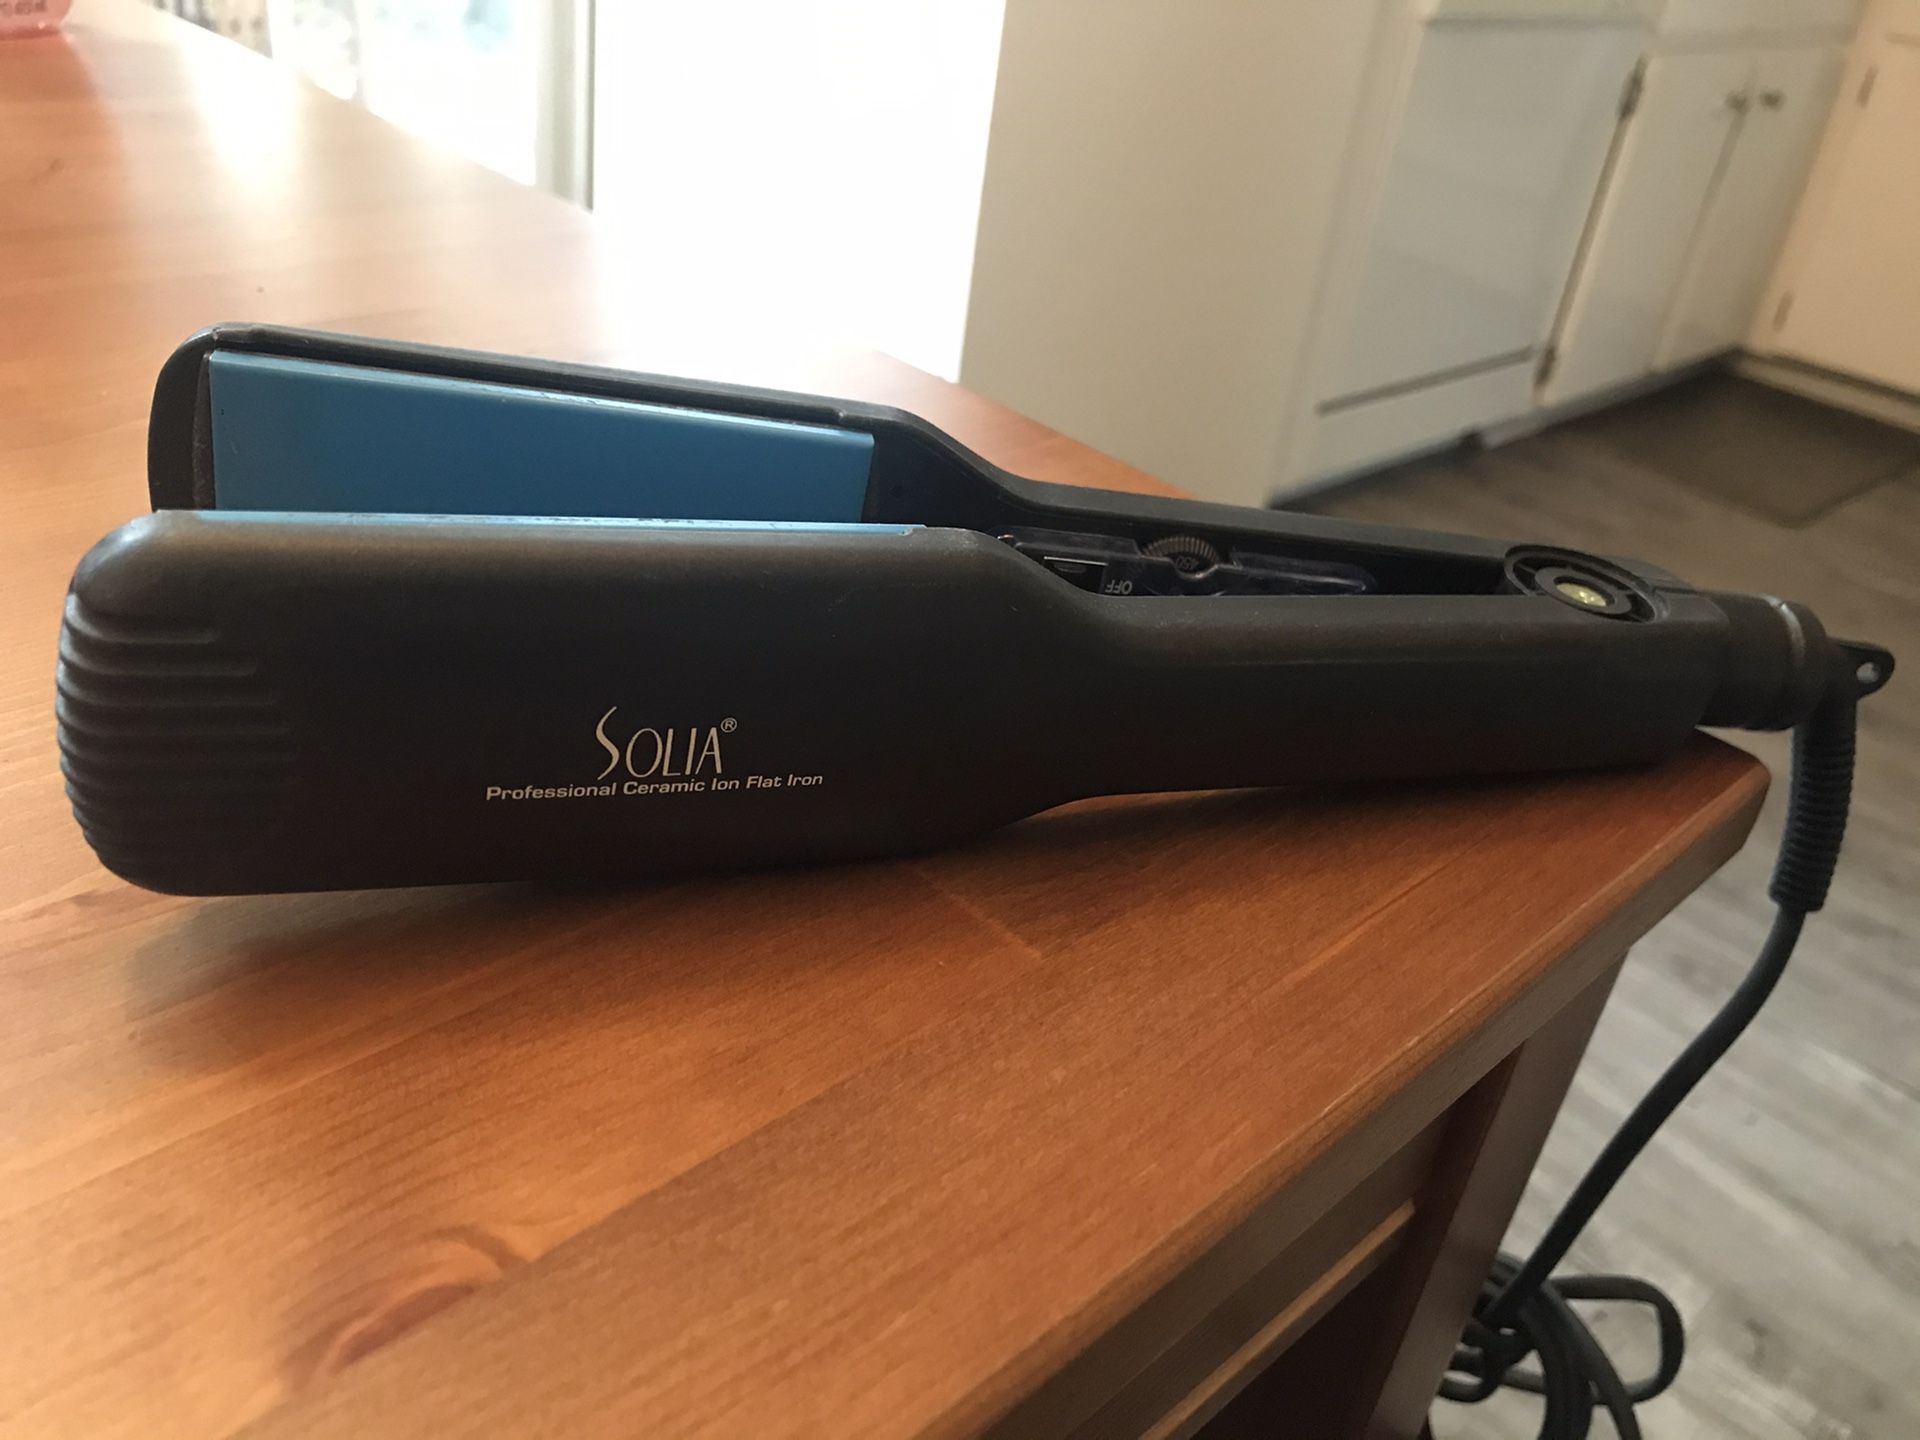 Solia ceramic hair straightener (all offers welcome!)